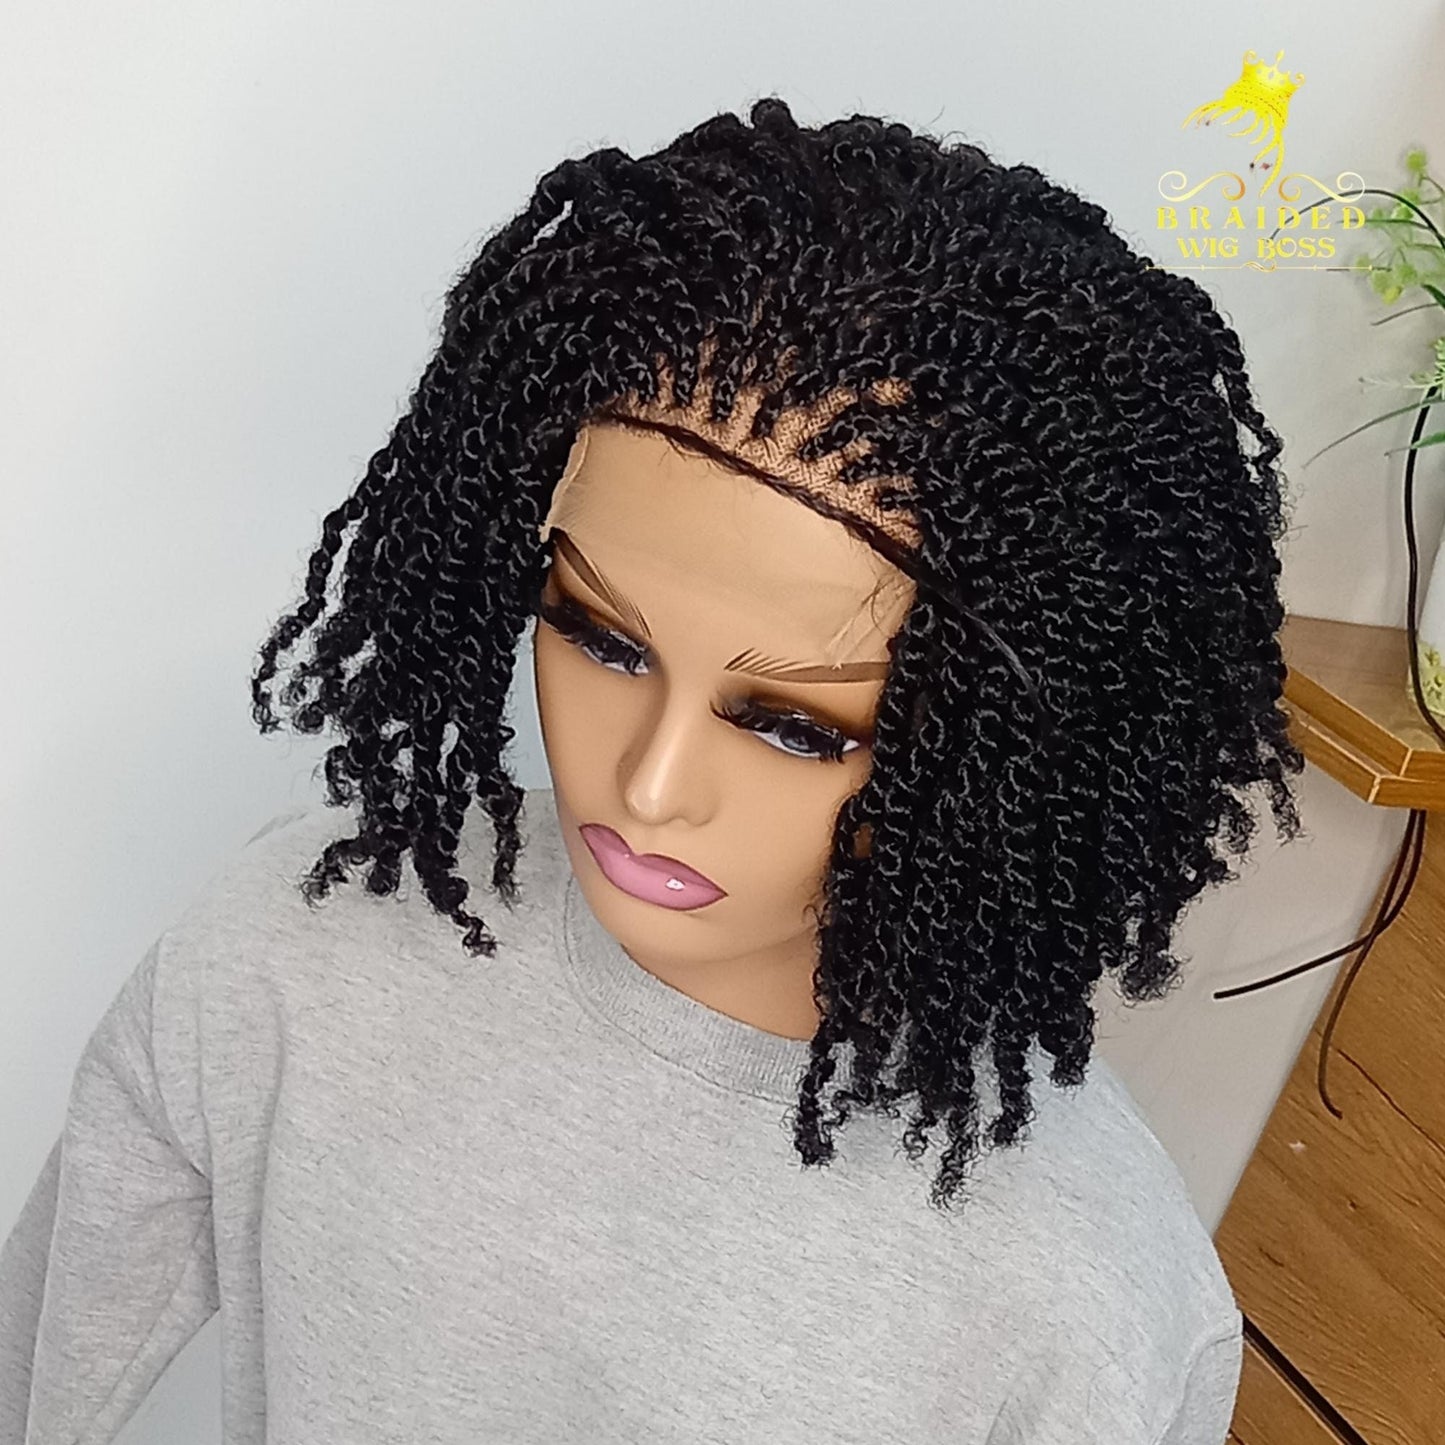 Kinky Crochet Braids Twist Wig On a 4 By 4 Braided Lace Front 8-10 inches Afro Braids Curly Handmade Glueless Braided Wig for Black Women